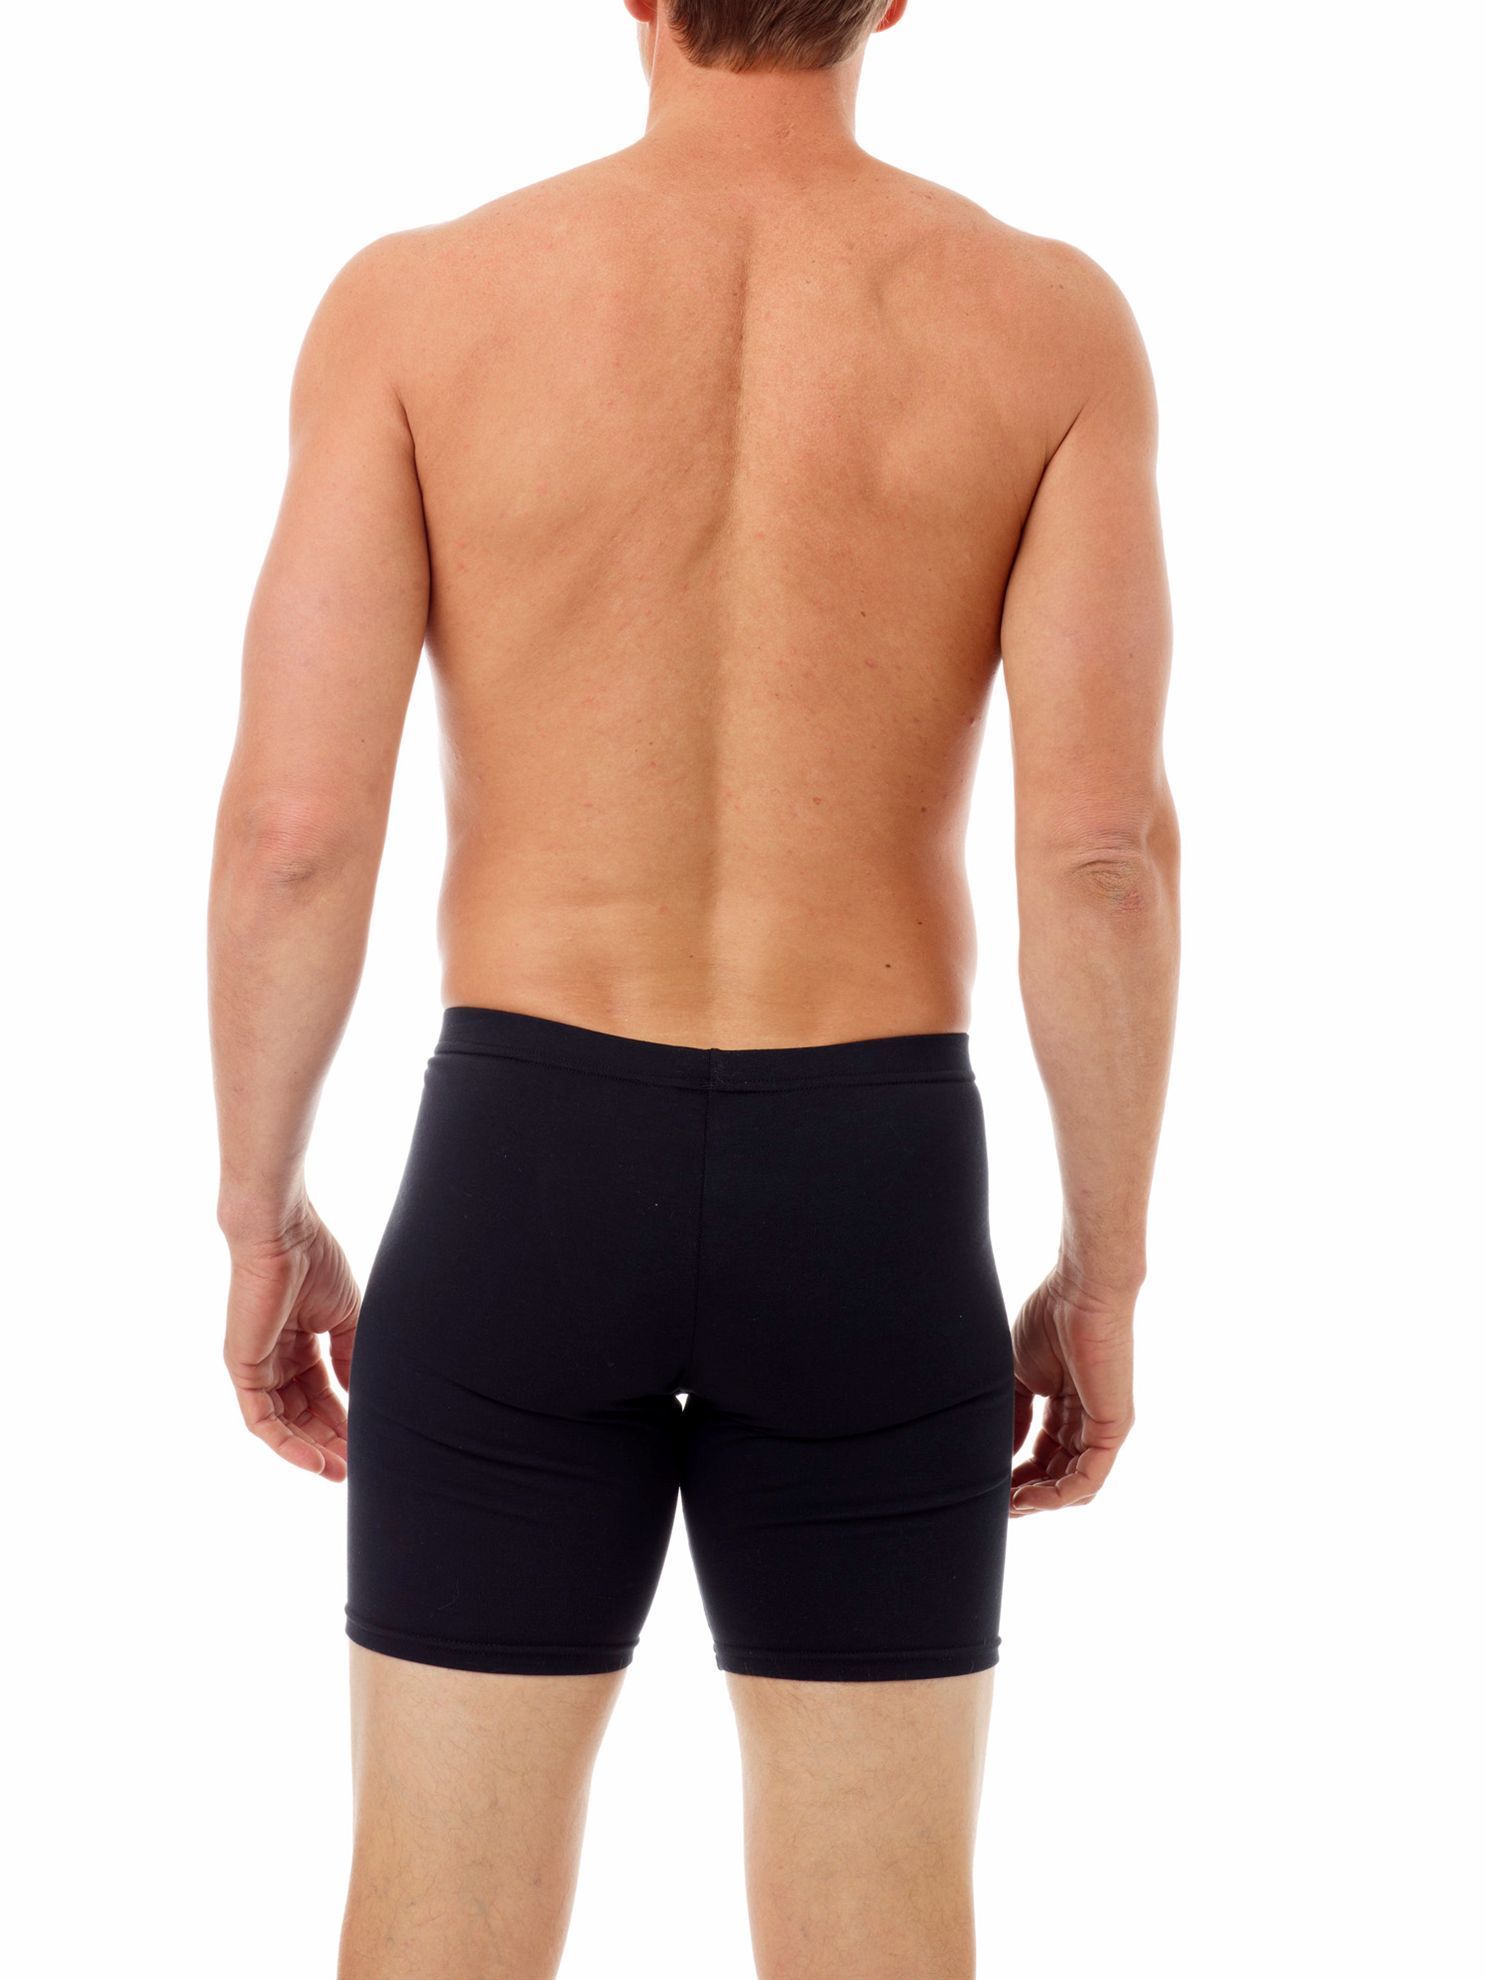 Buy Papi Men's 3-Pack Cotton Stretch Thong, Black, Small at